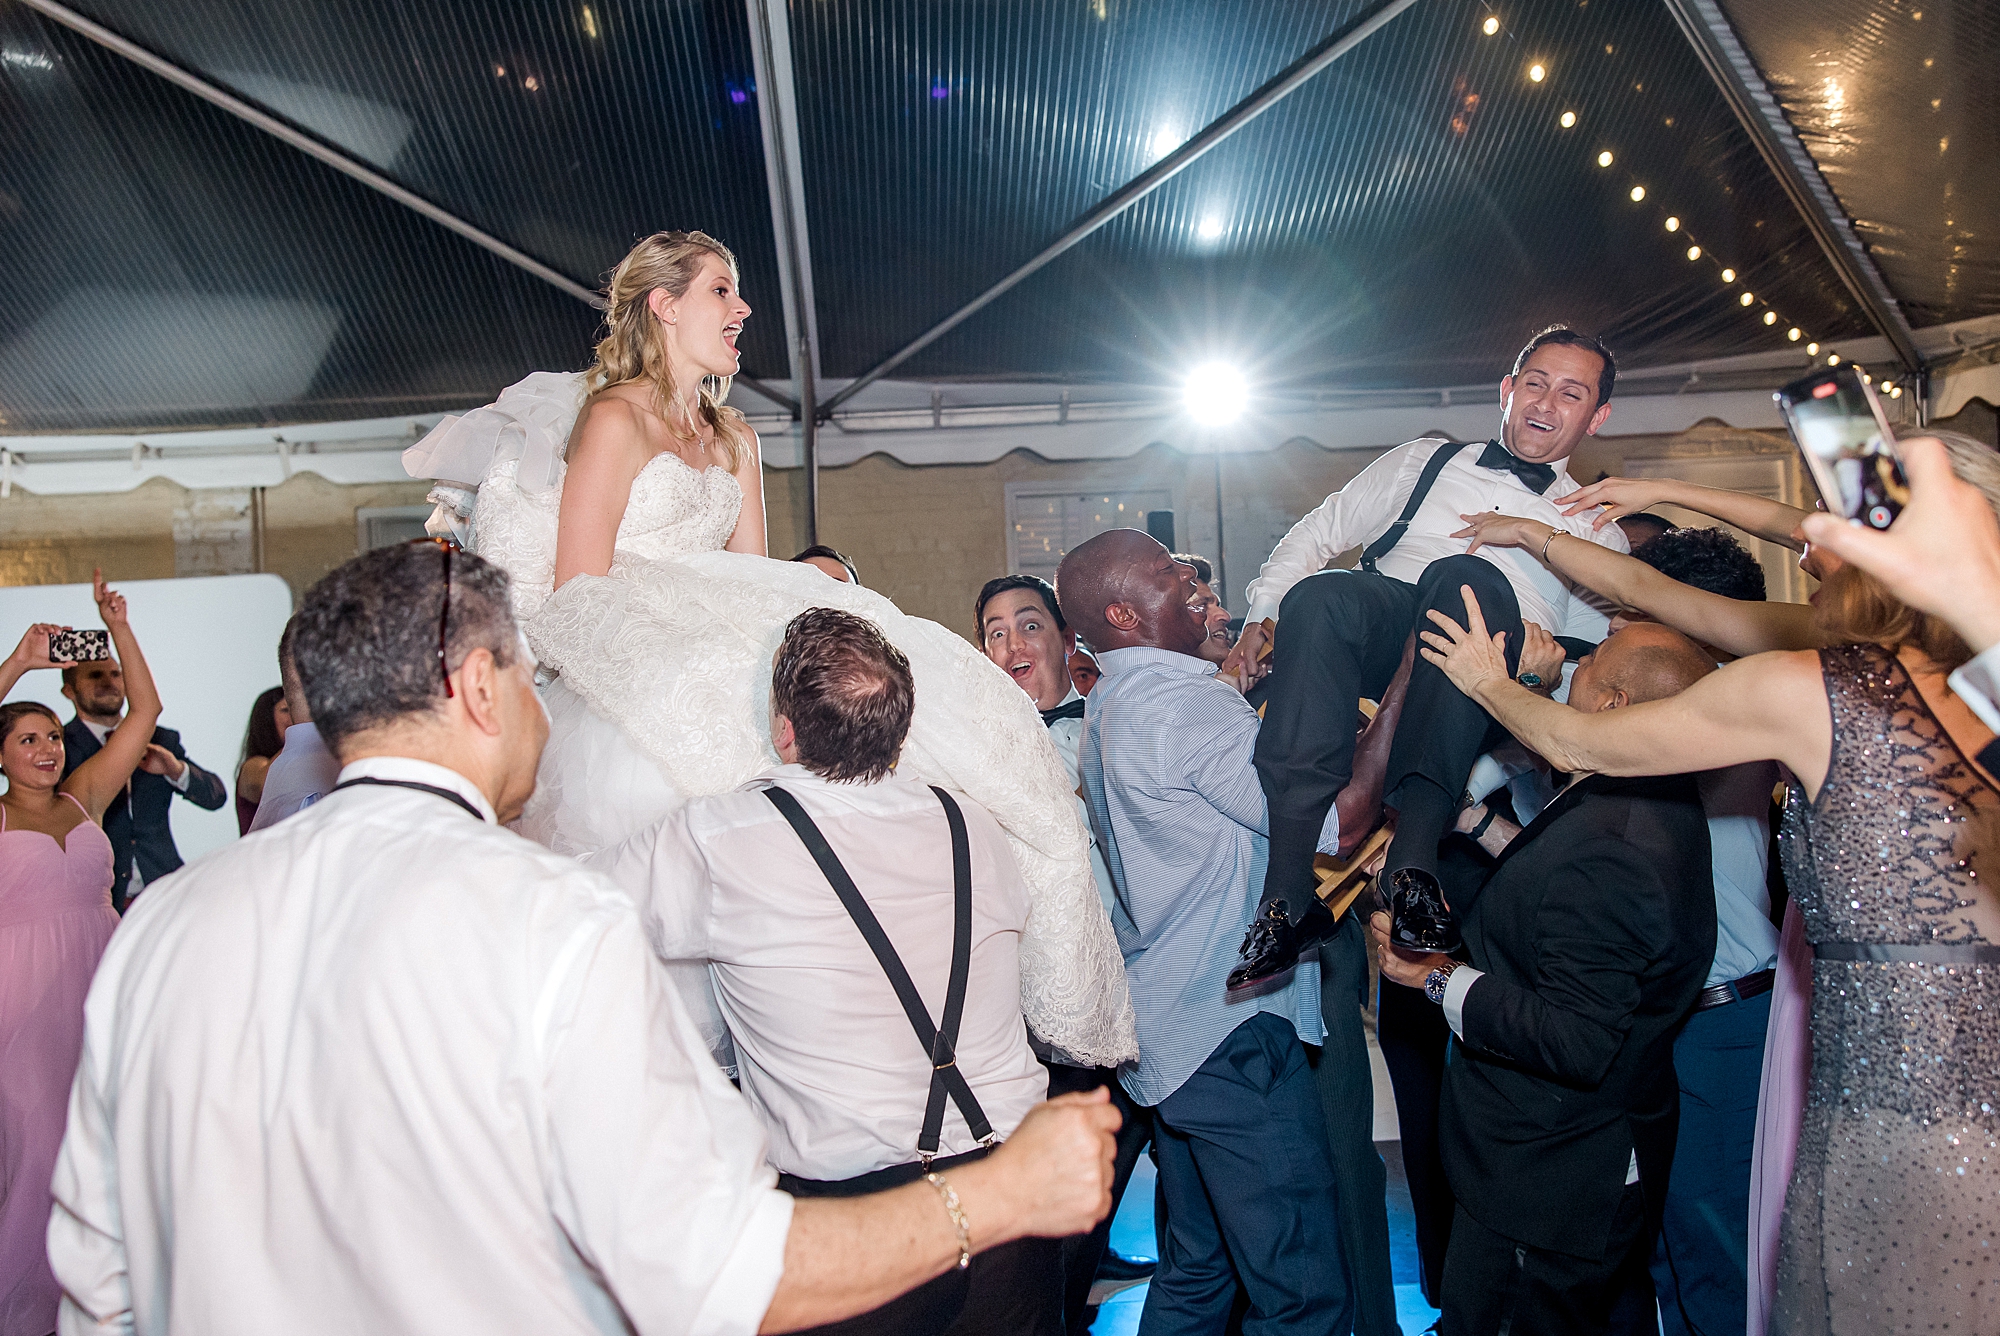 wedding guests lift bride in chair at wedding reception